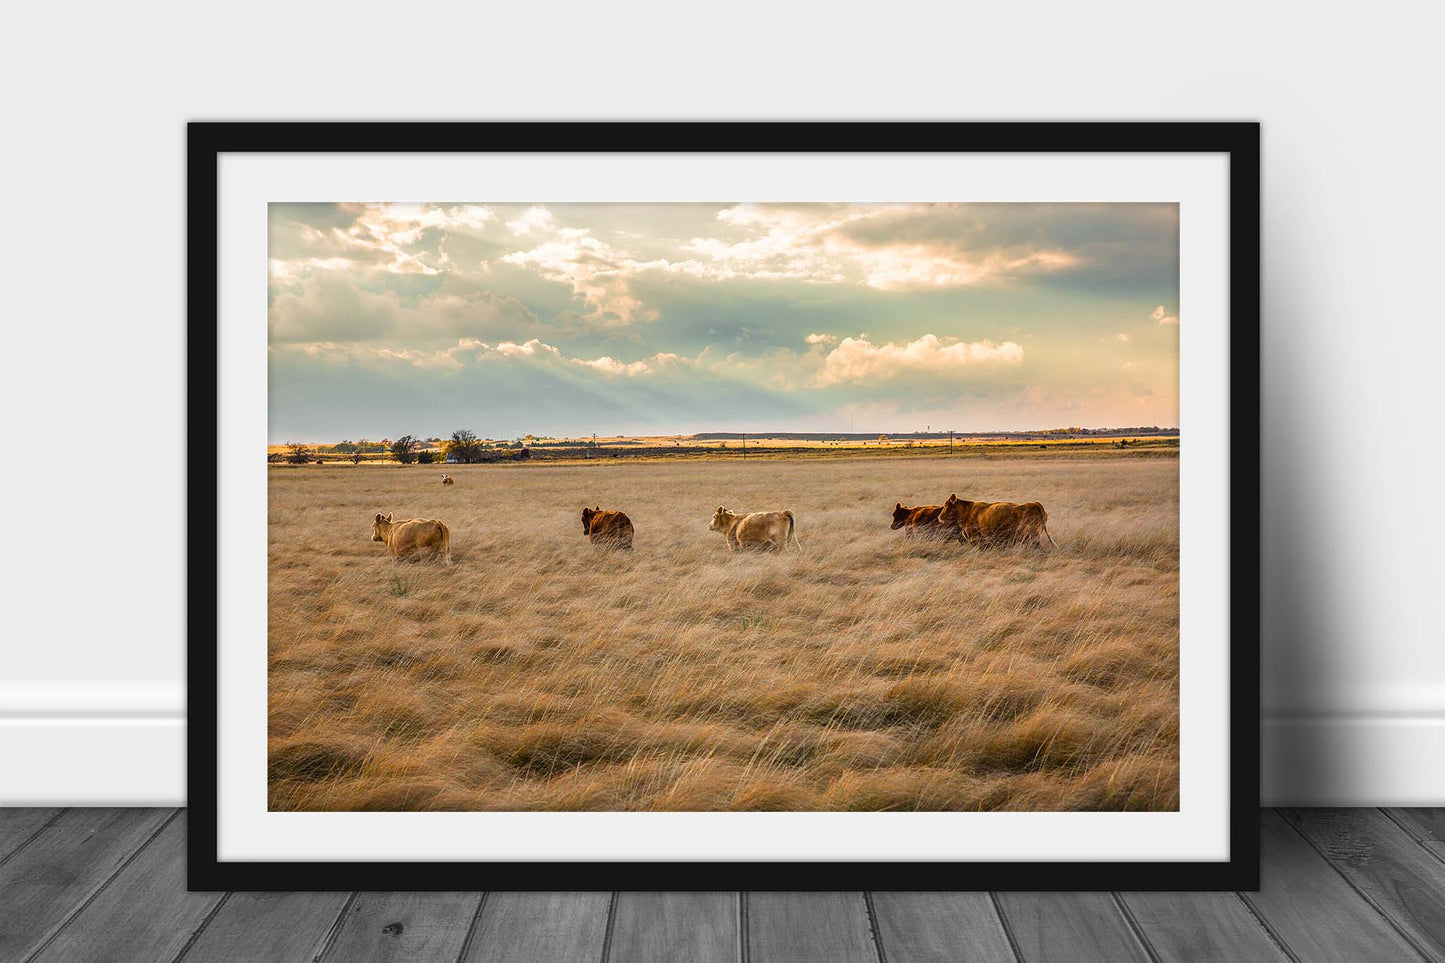 Framed western photography print with optional mat of cows wading through tall prairie grass on an autumn day in the Texas panhandle by Sean Ramsey of Southern Plains Photography.